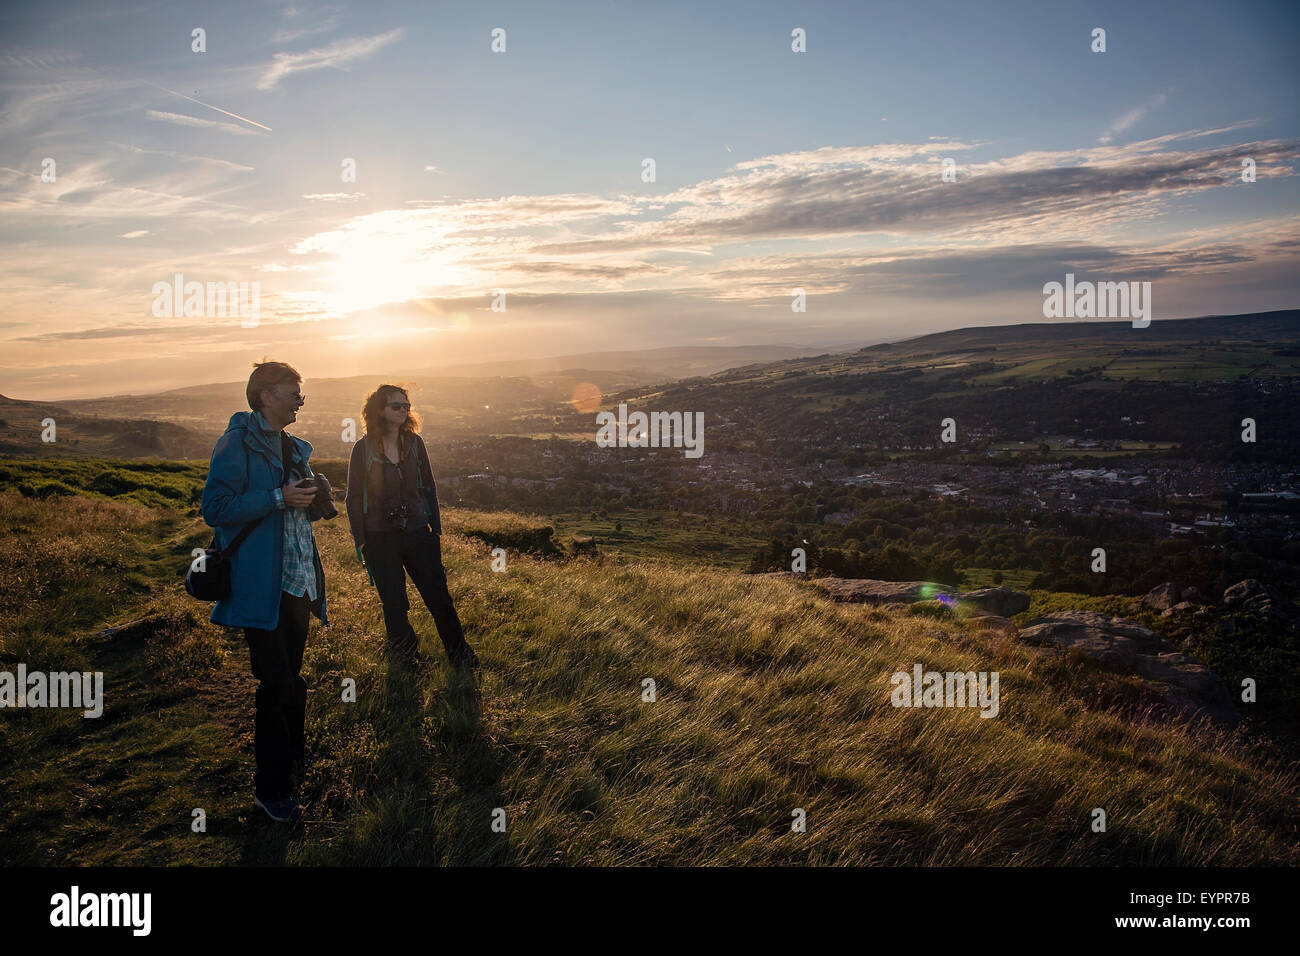 Walkers / Photo Walkers taking in the view over Ilkley Moor at sunset Stock Photo